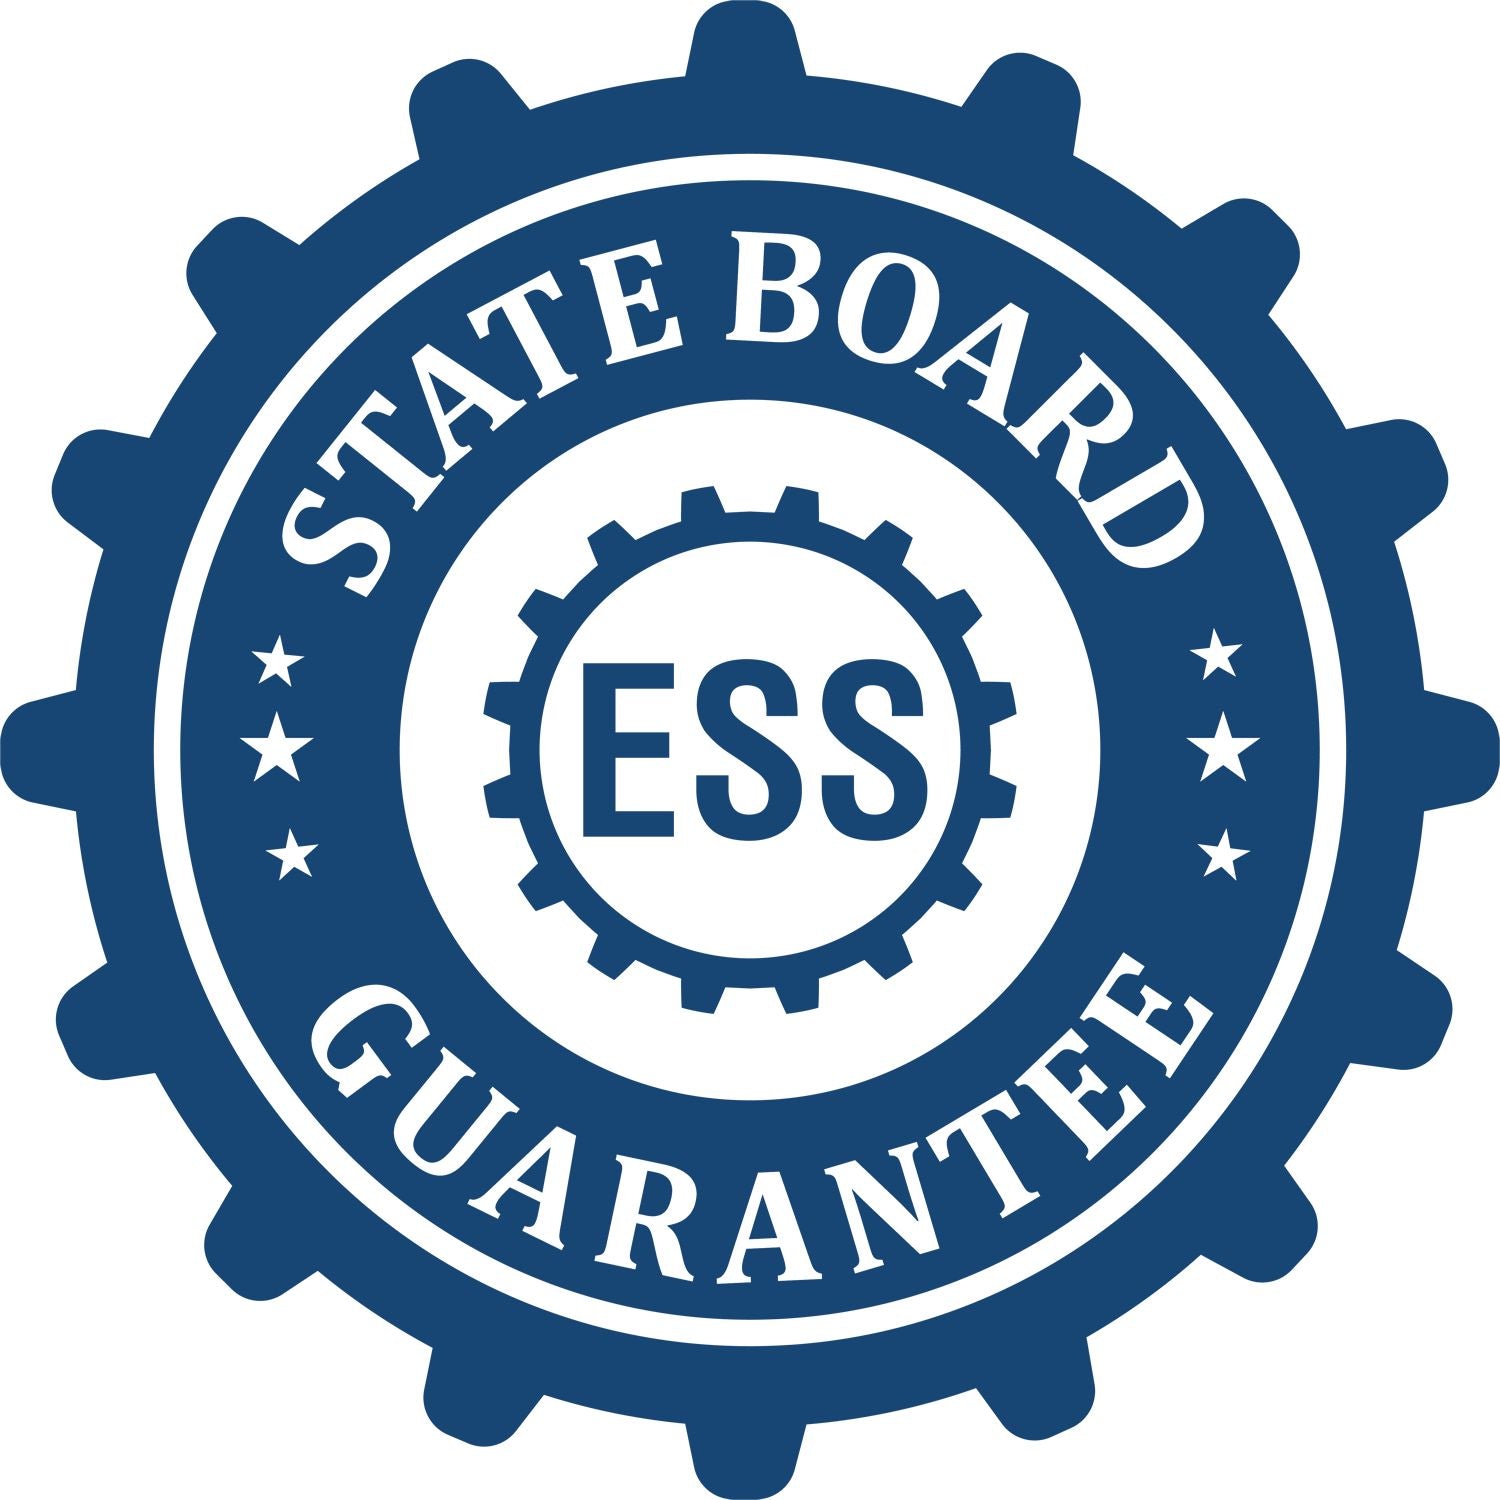 An emblem in a gear shape illustrating a state board guarantee for the State of Connecticut Handheld Landscape Architect Seal product.